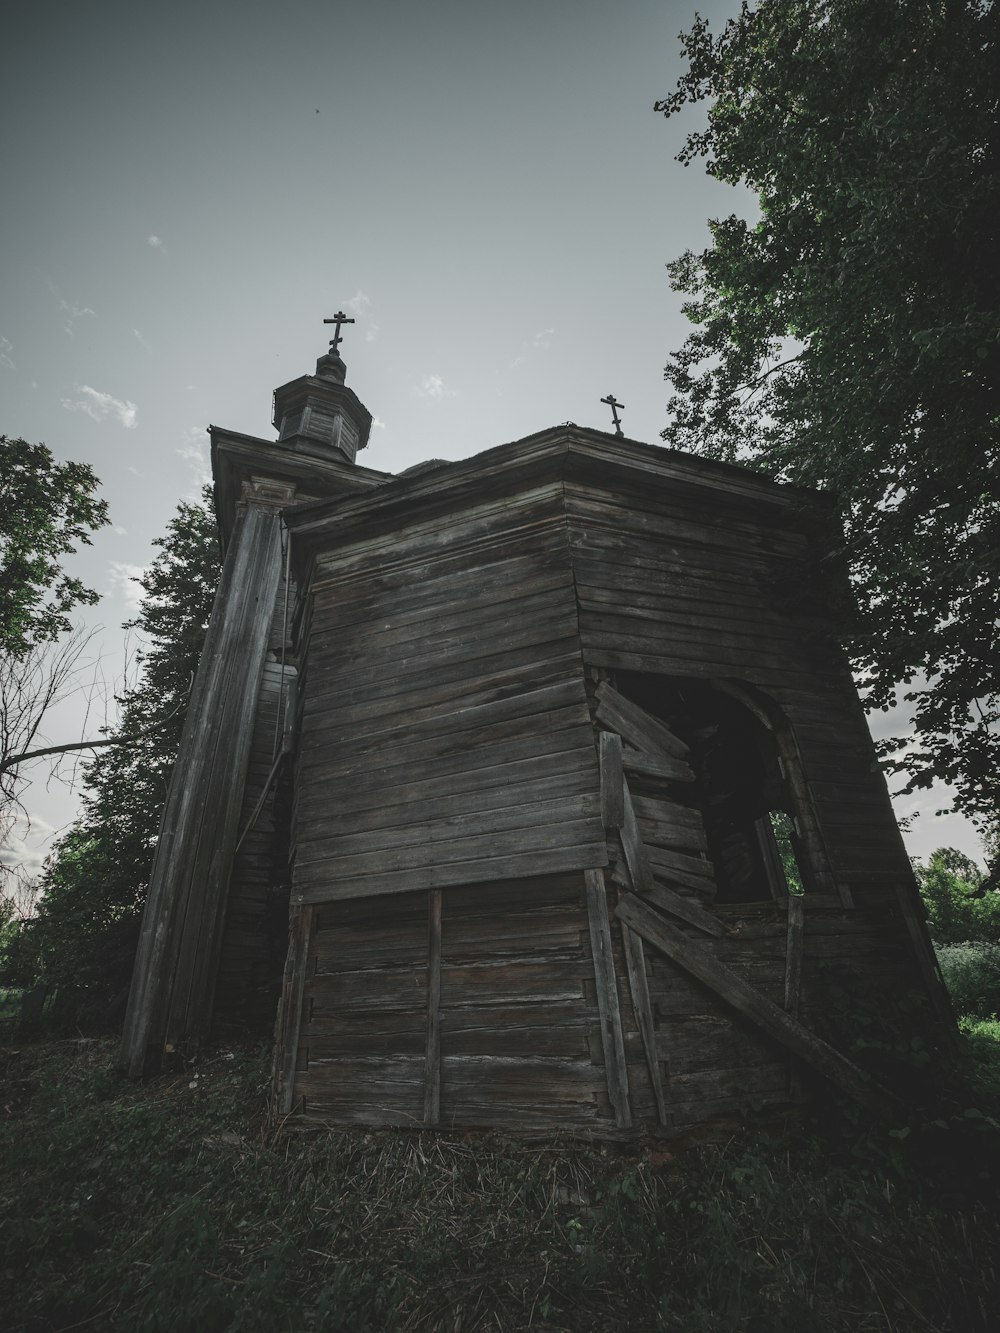 an old wooden church with a steeple on top